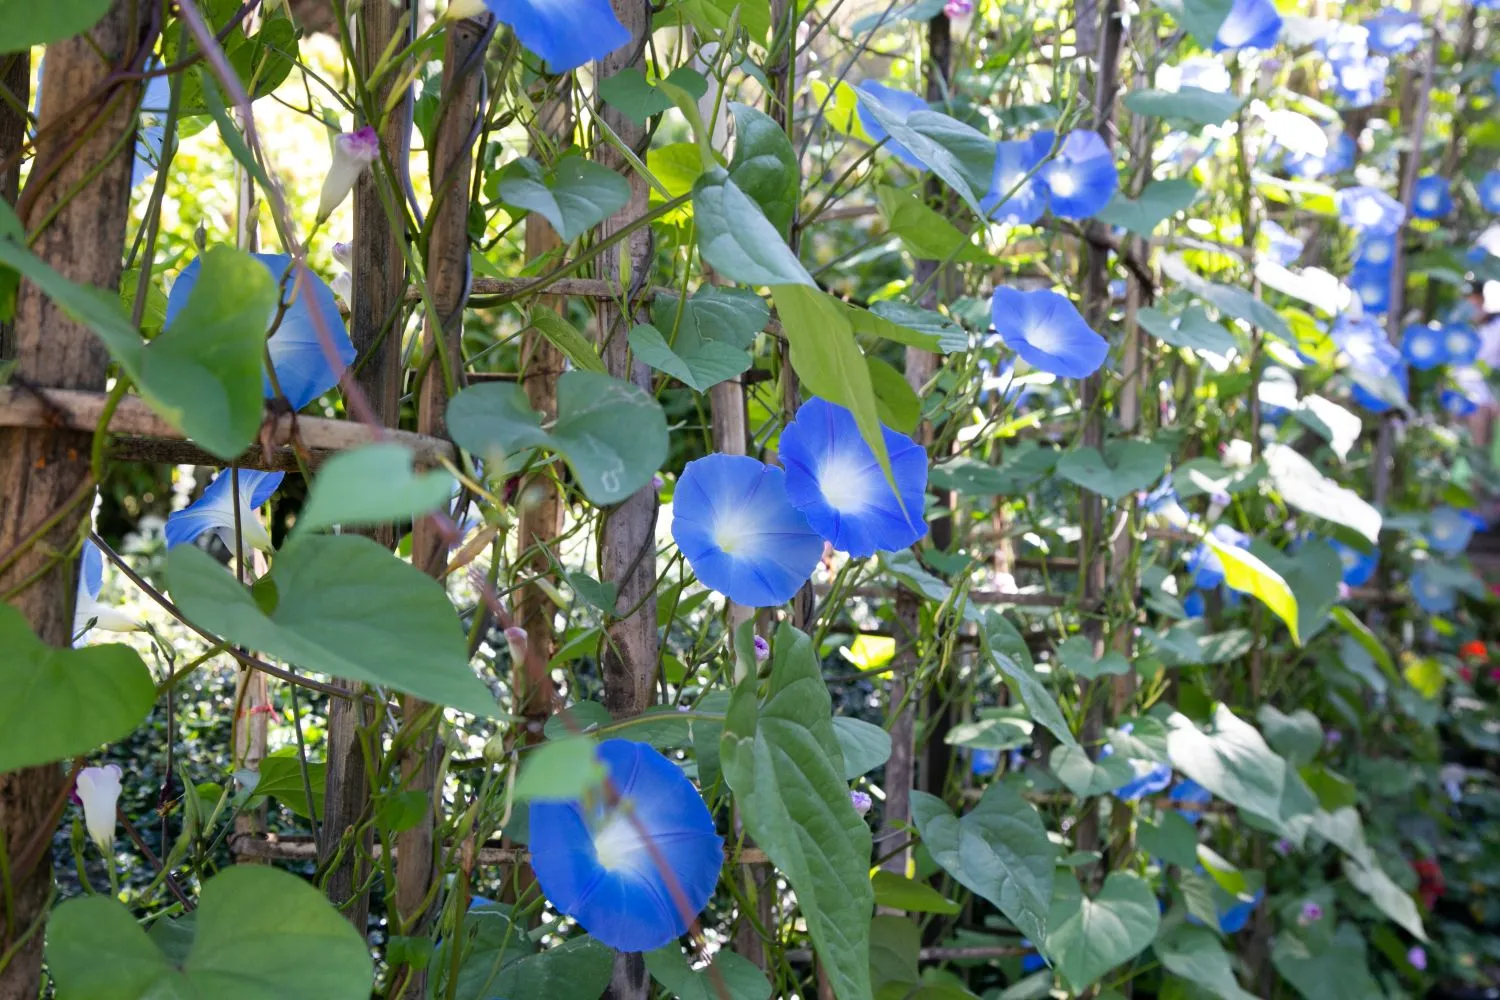 when do heavenly blue morning glories bloom